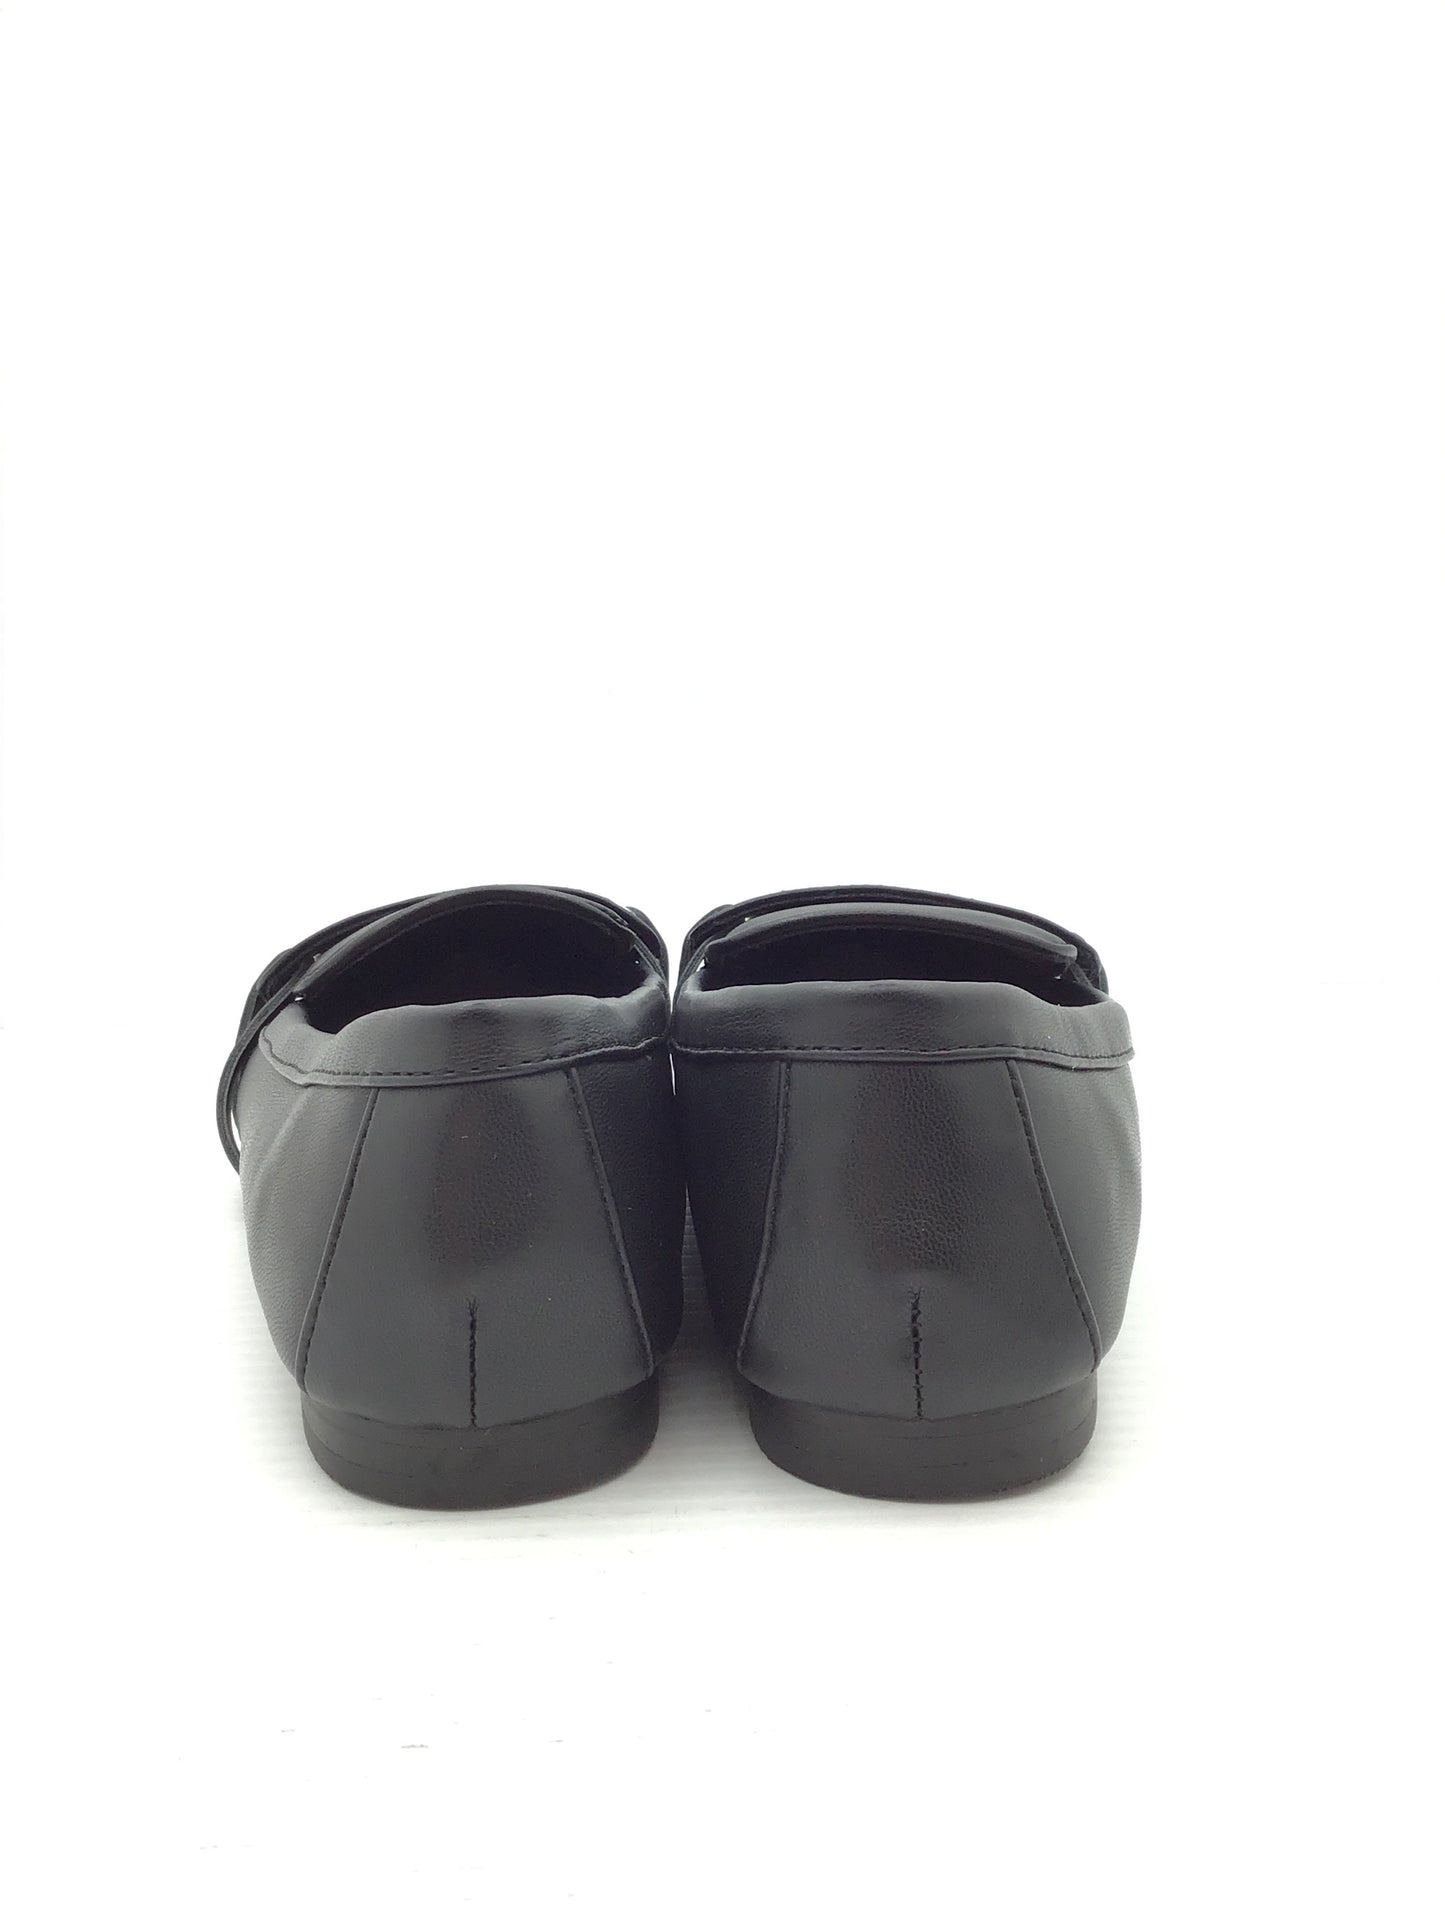 Shoes Flats Mule & Slide By Report  Size: 7.5